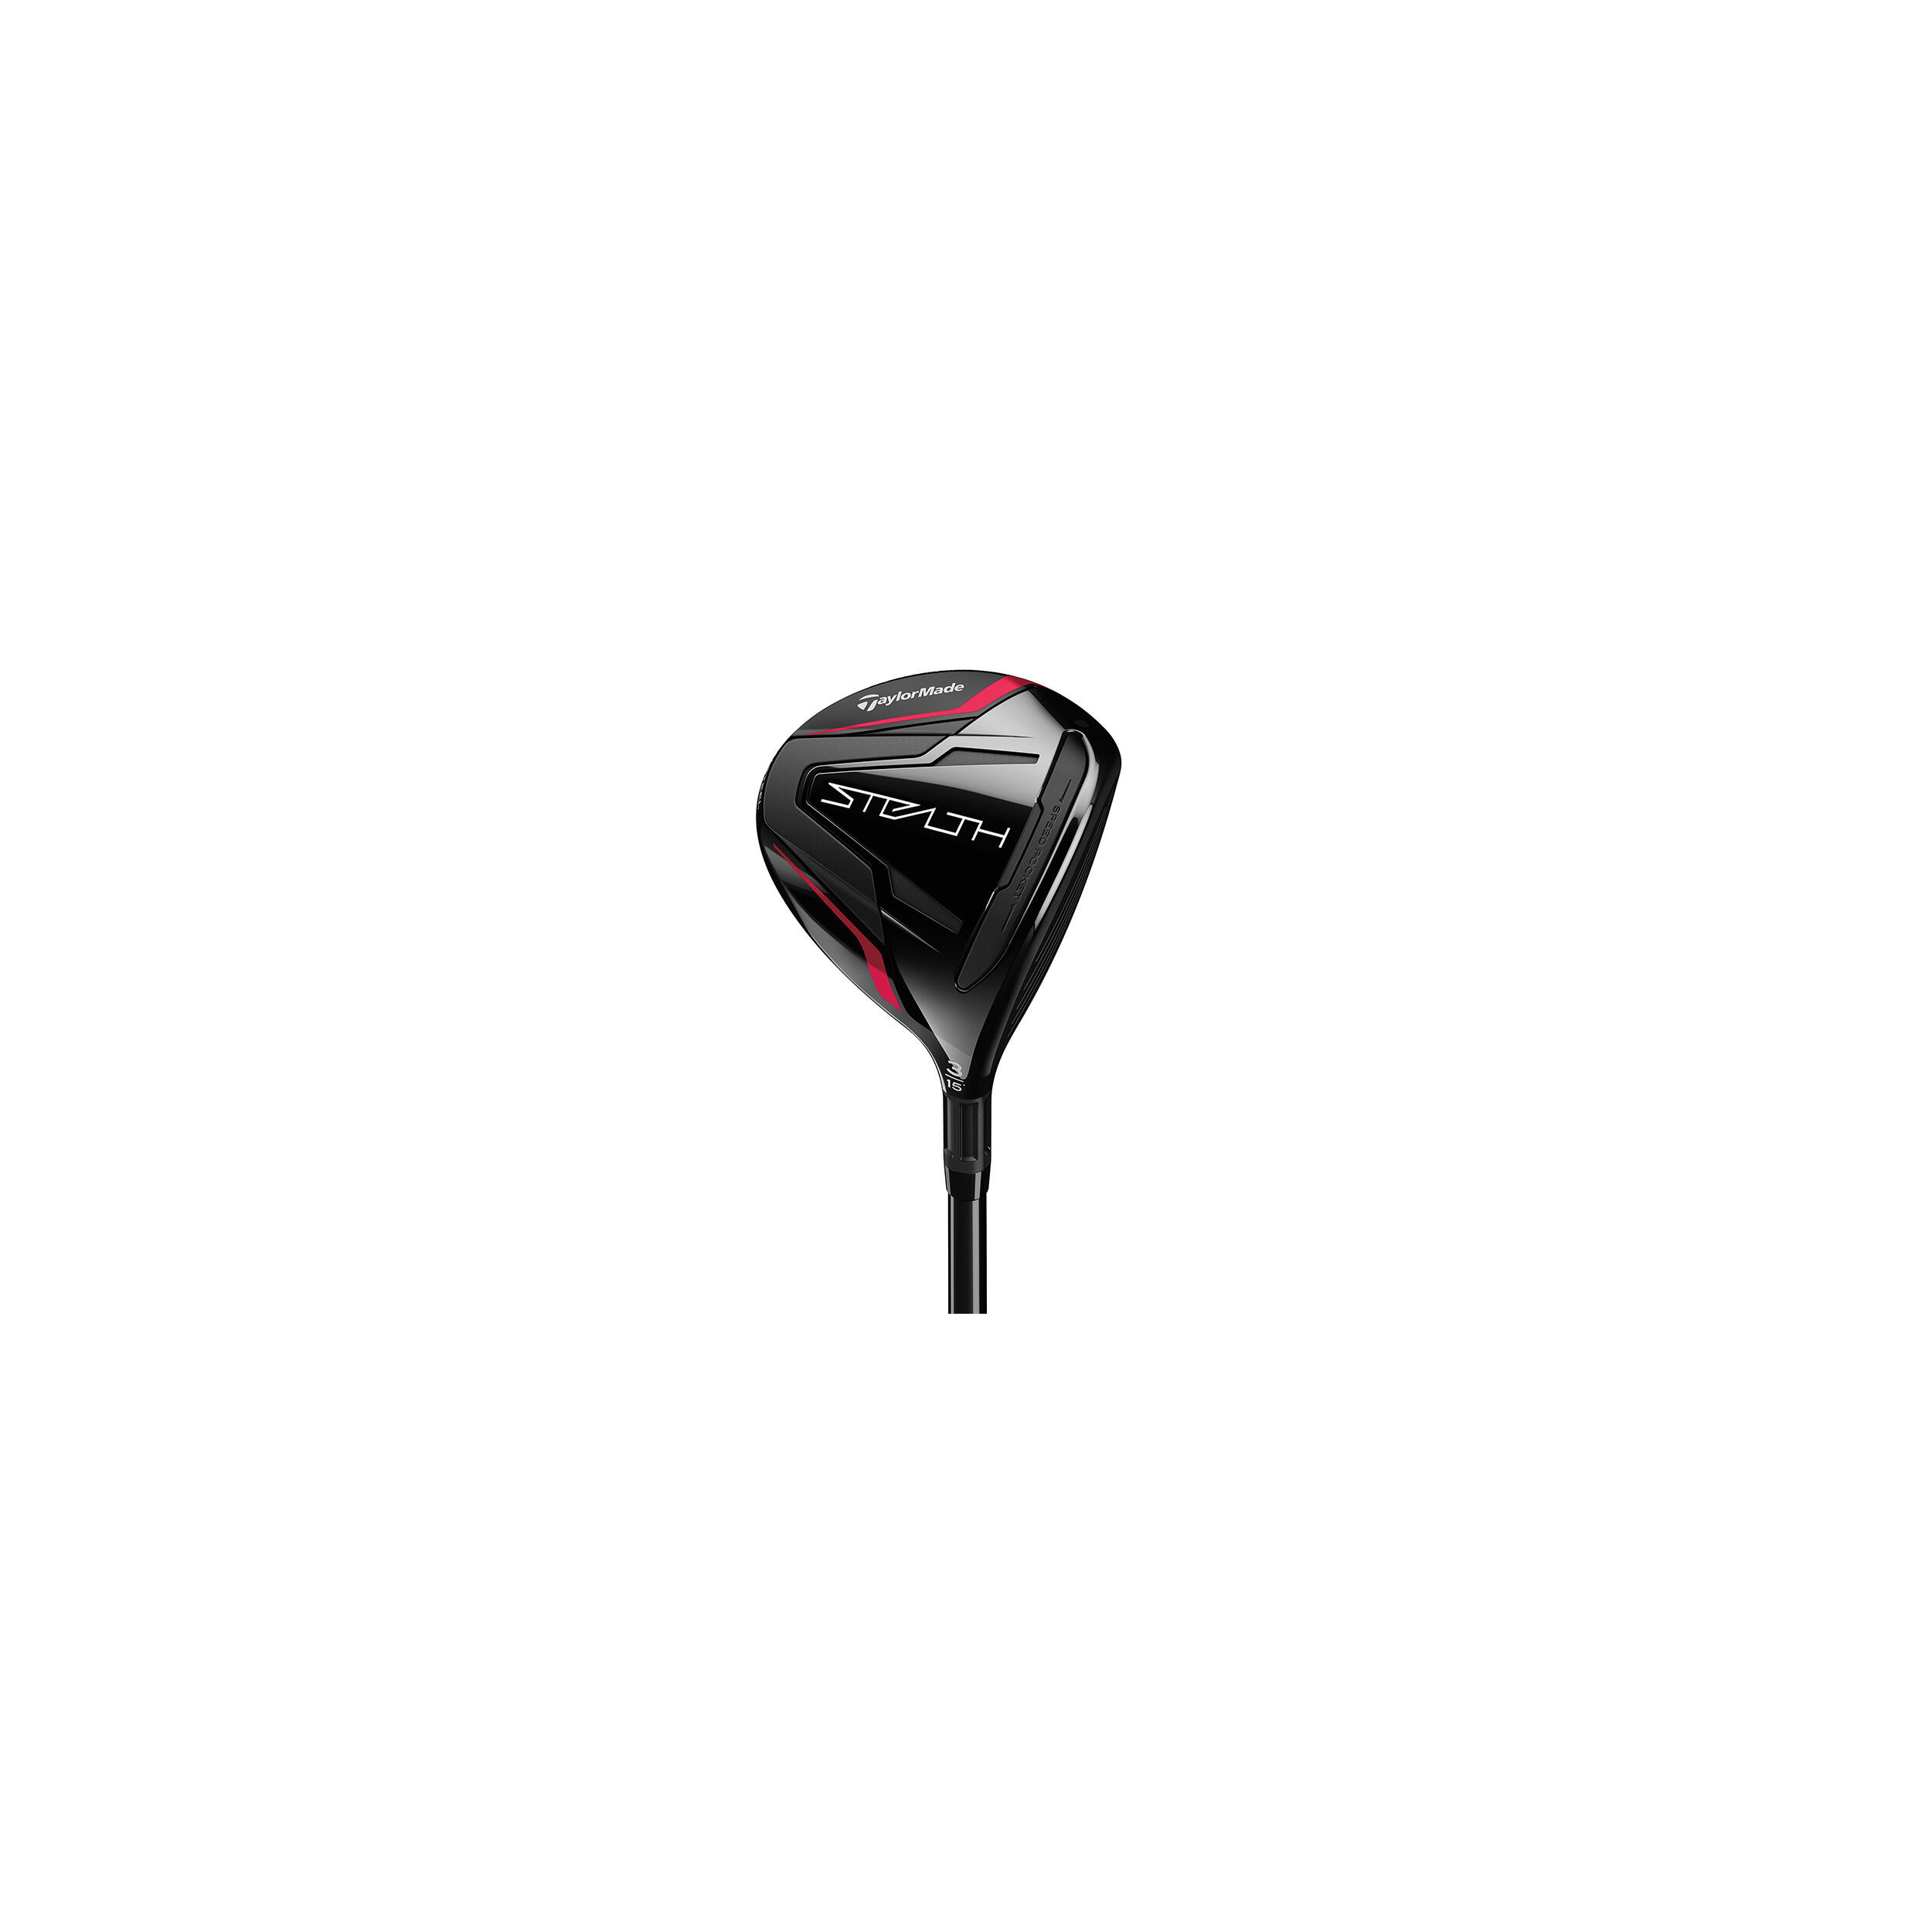 THE STREET WOOD TAYLORMADE STEALTH 3 15th ZURDO